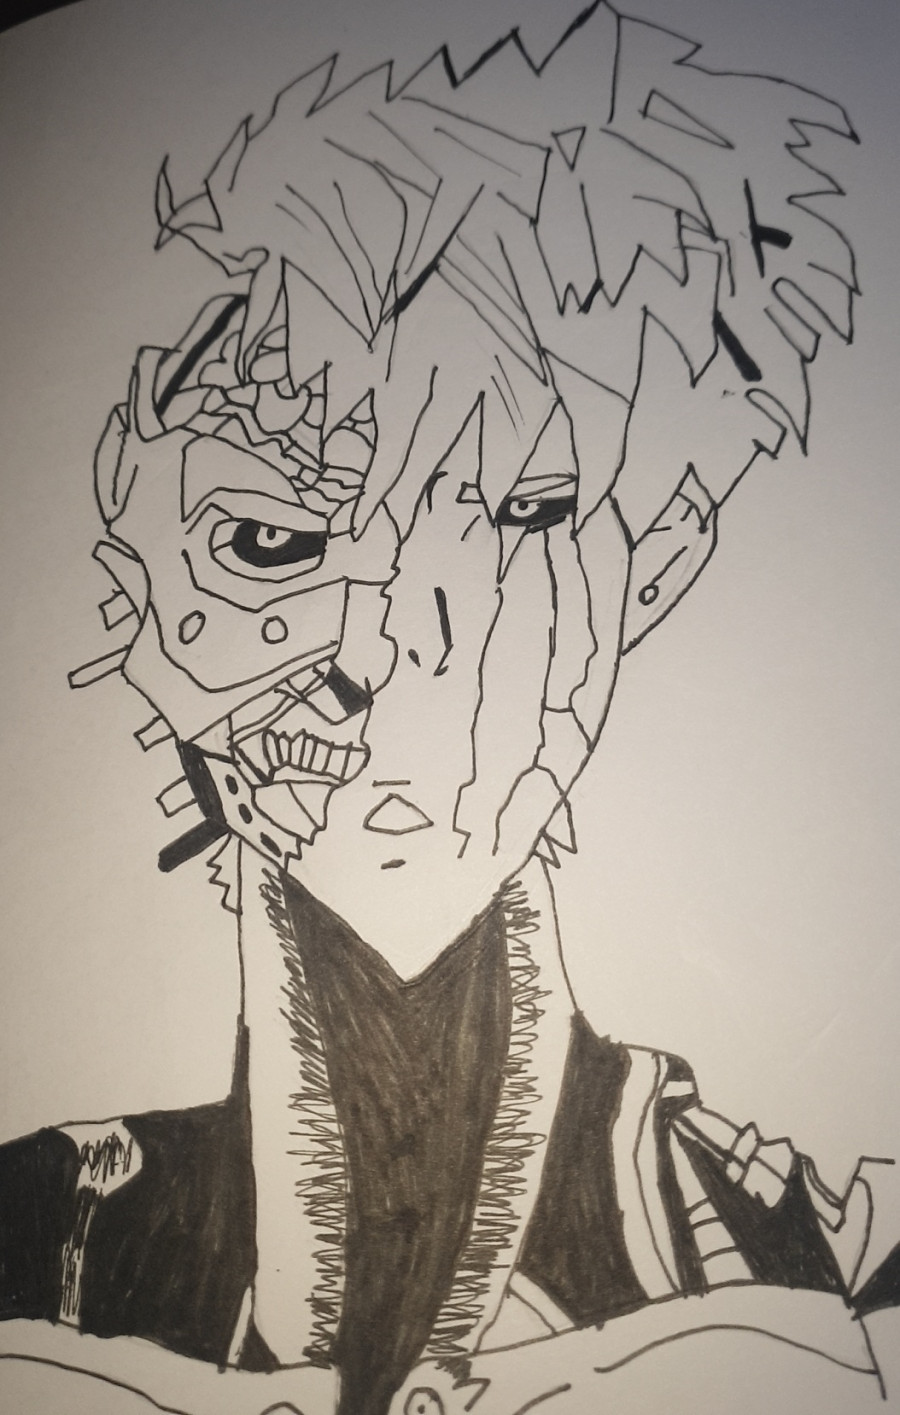 'Genos' by Johnny (13) from Cork